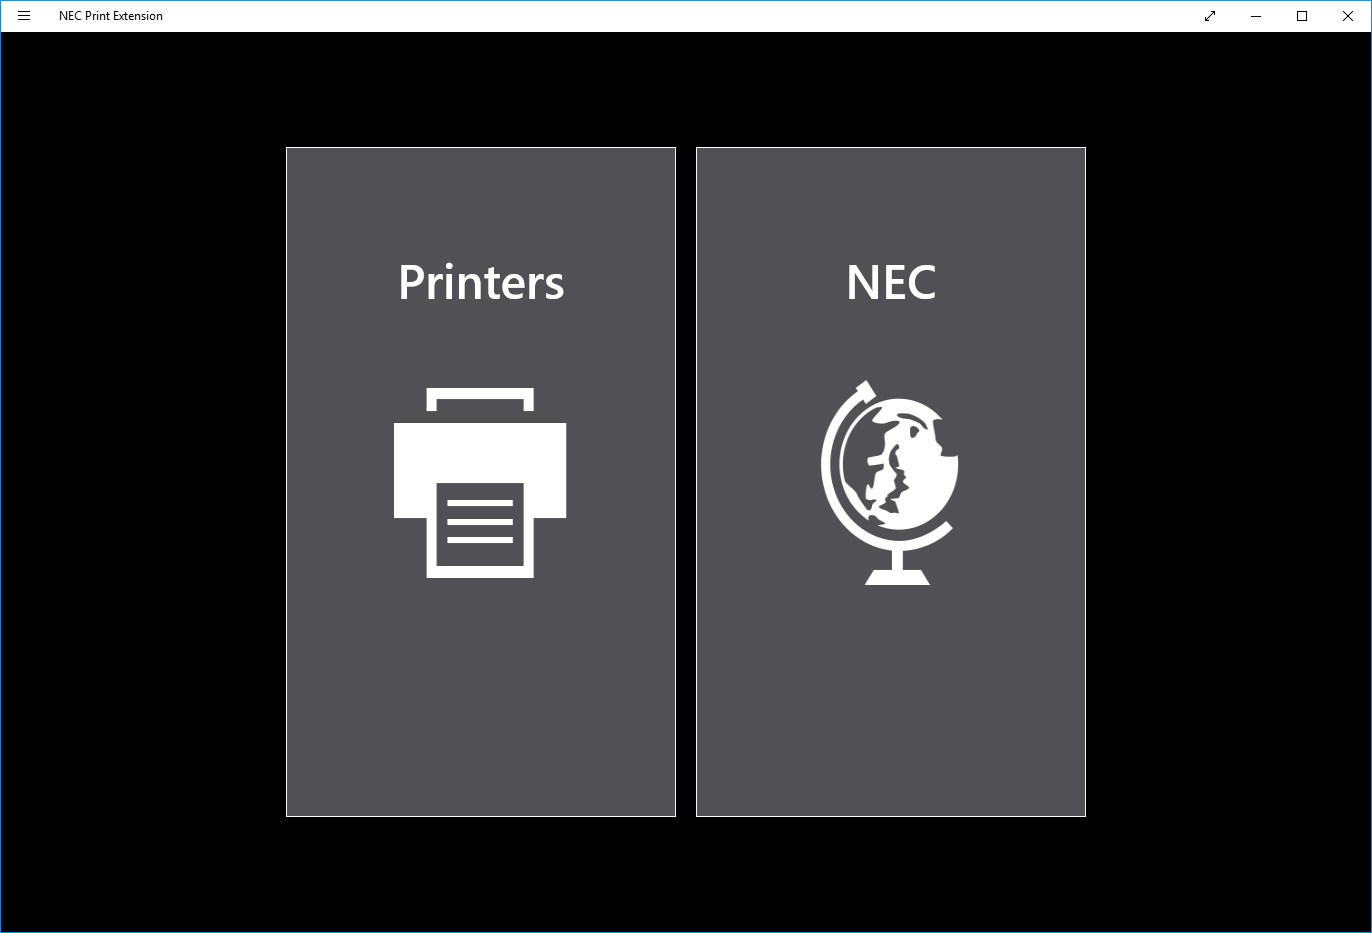 You can know connected printers or visit to our homepage.